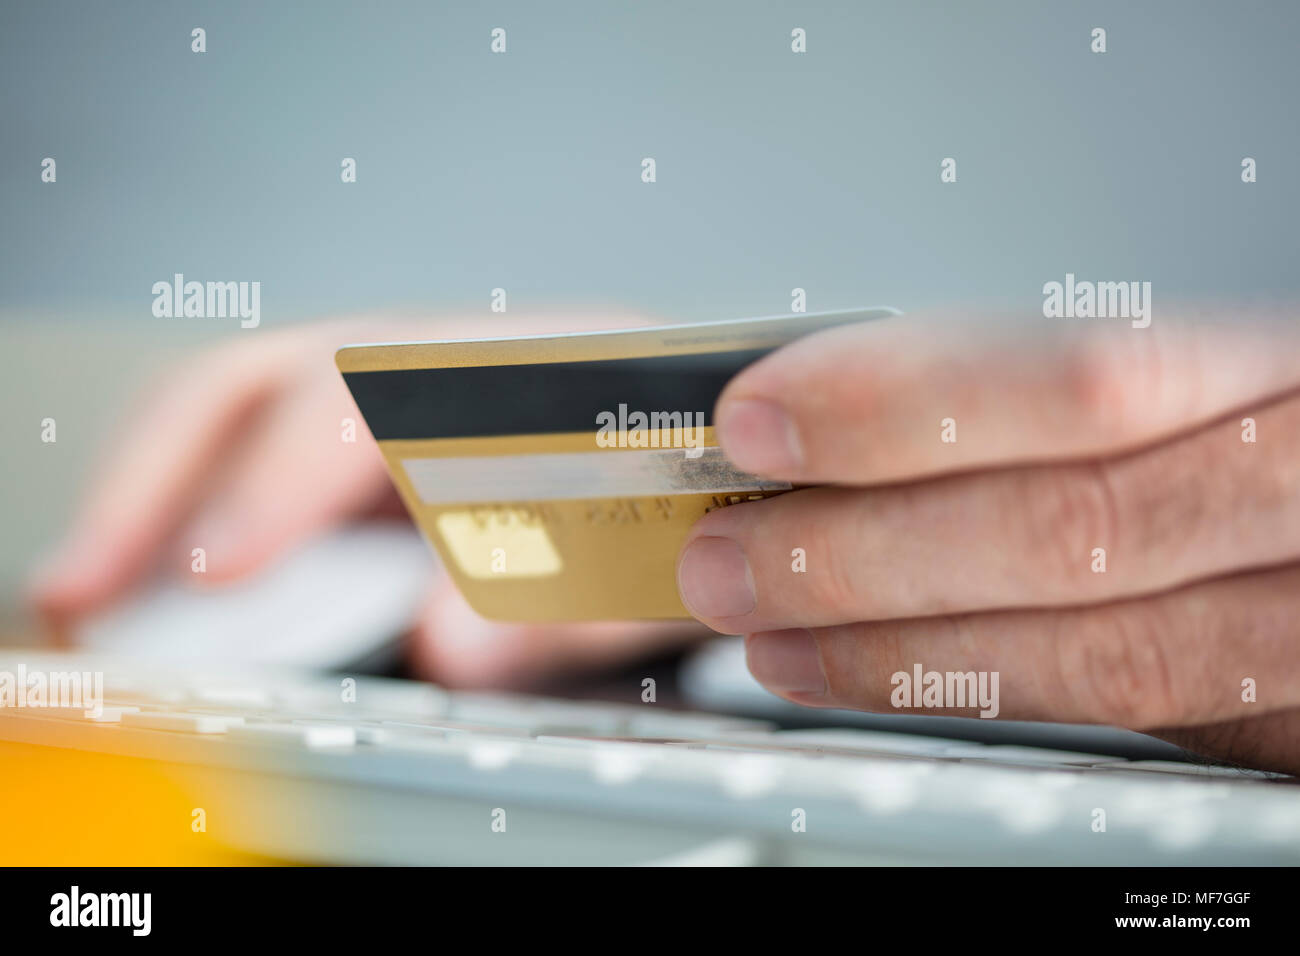 Man making online payment with credit card, close-up Stock Photo